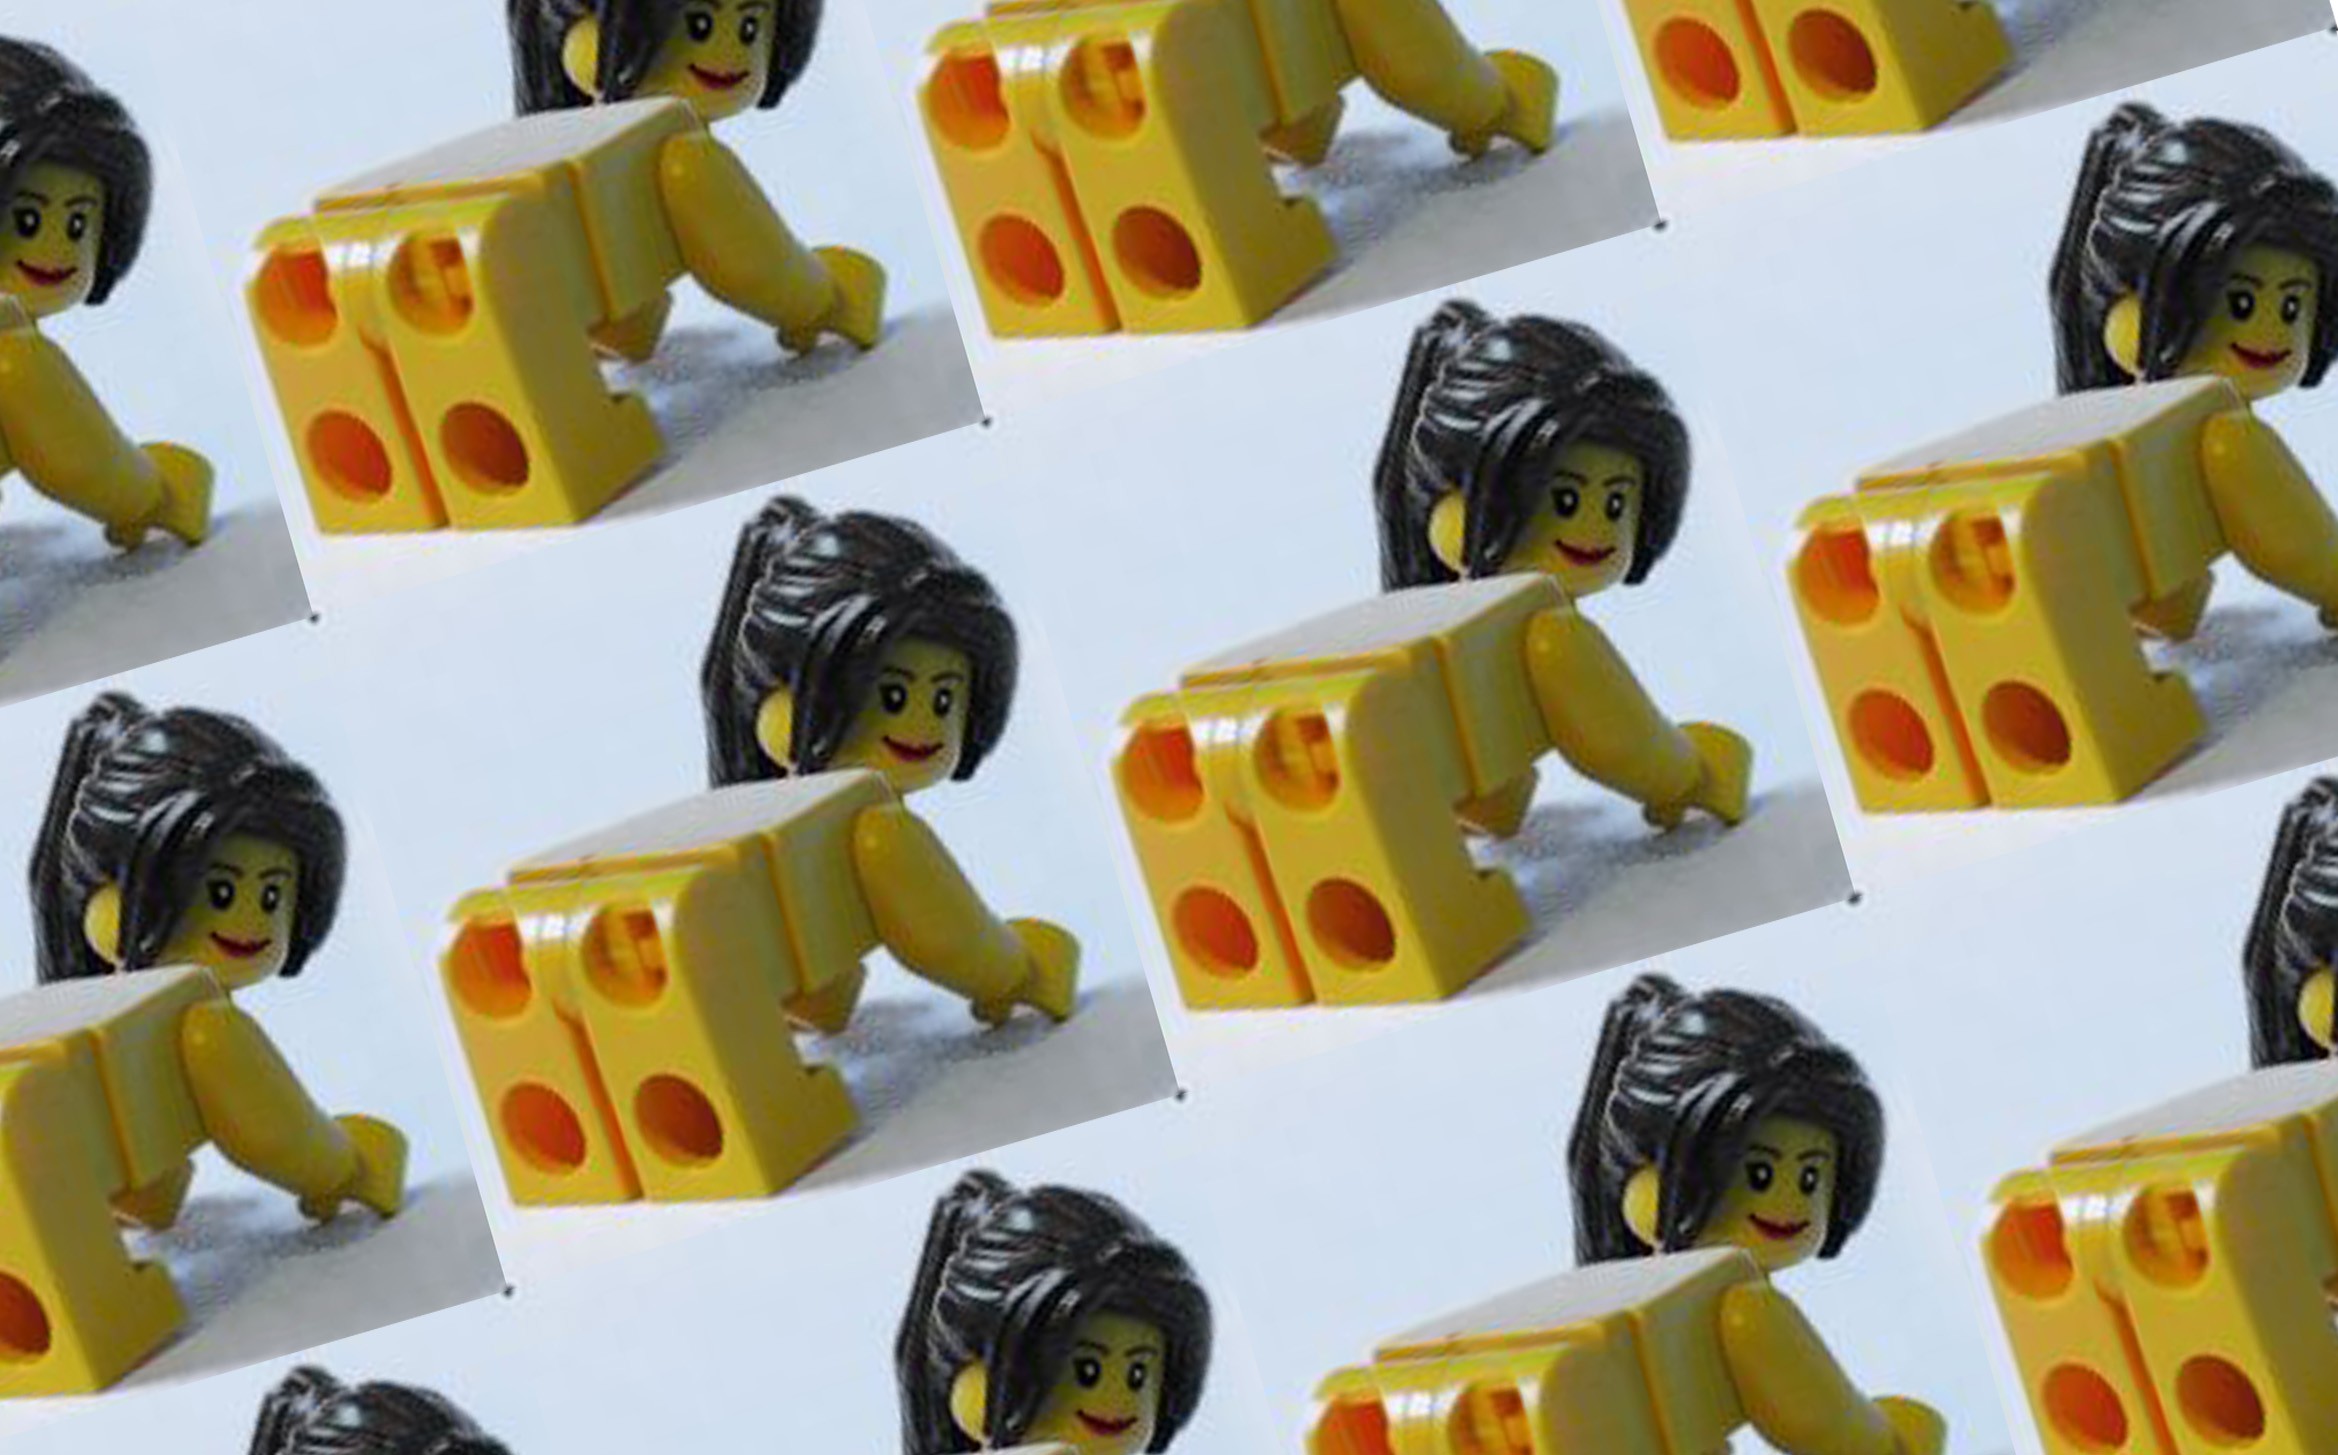 Sexy Lego Porn - Analyzing Lego Porn, the Fetish That Will Ruin Your Childhood